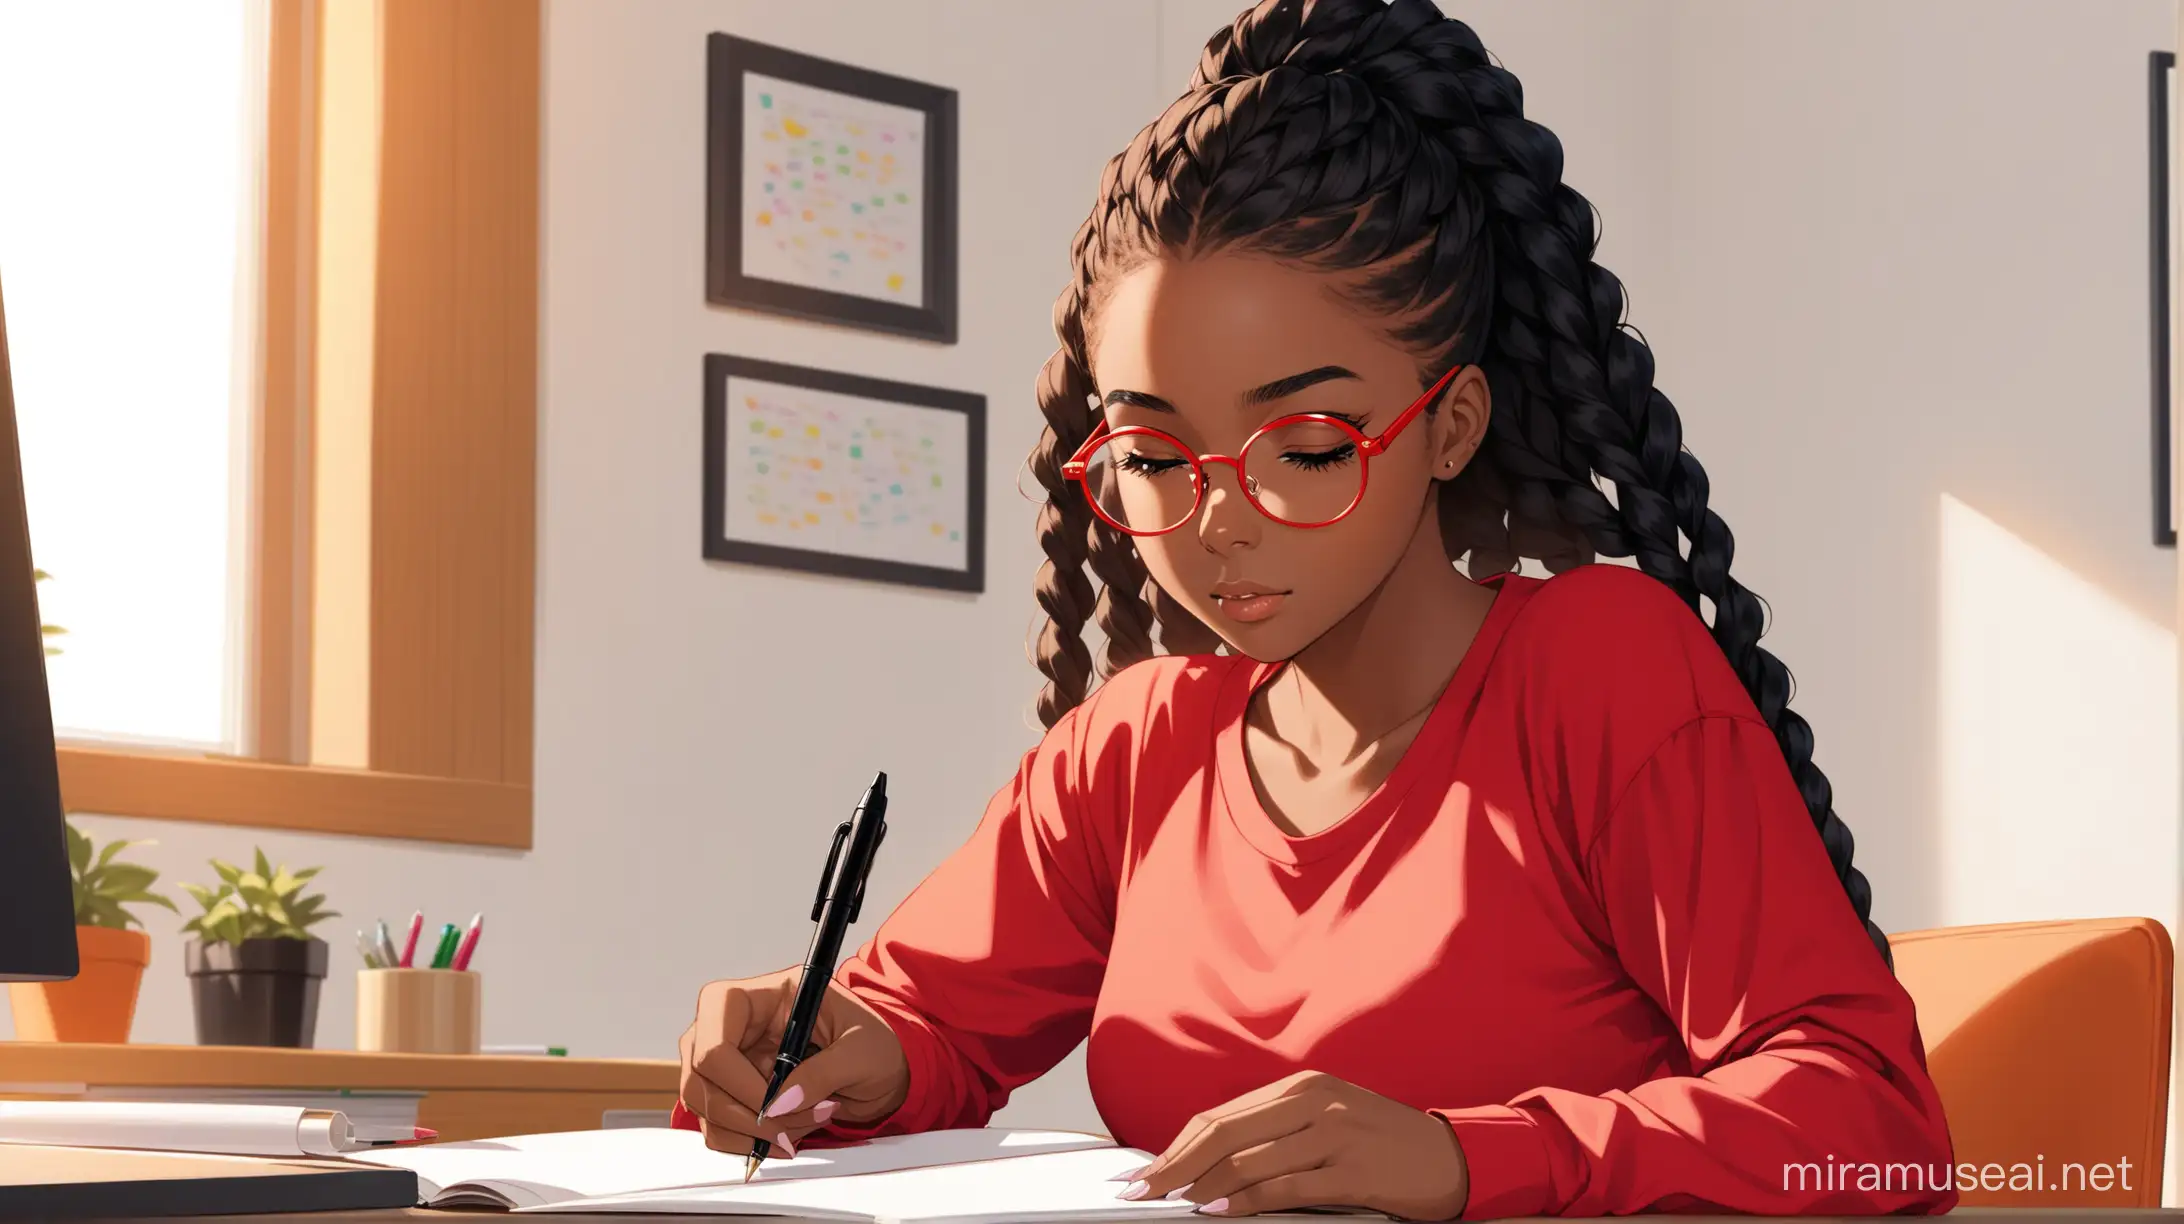 Young Black Woman with Passion Twists Writing in Home Office